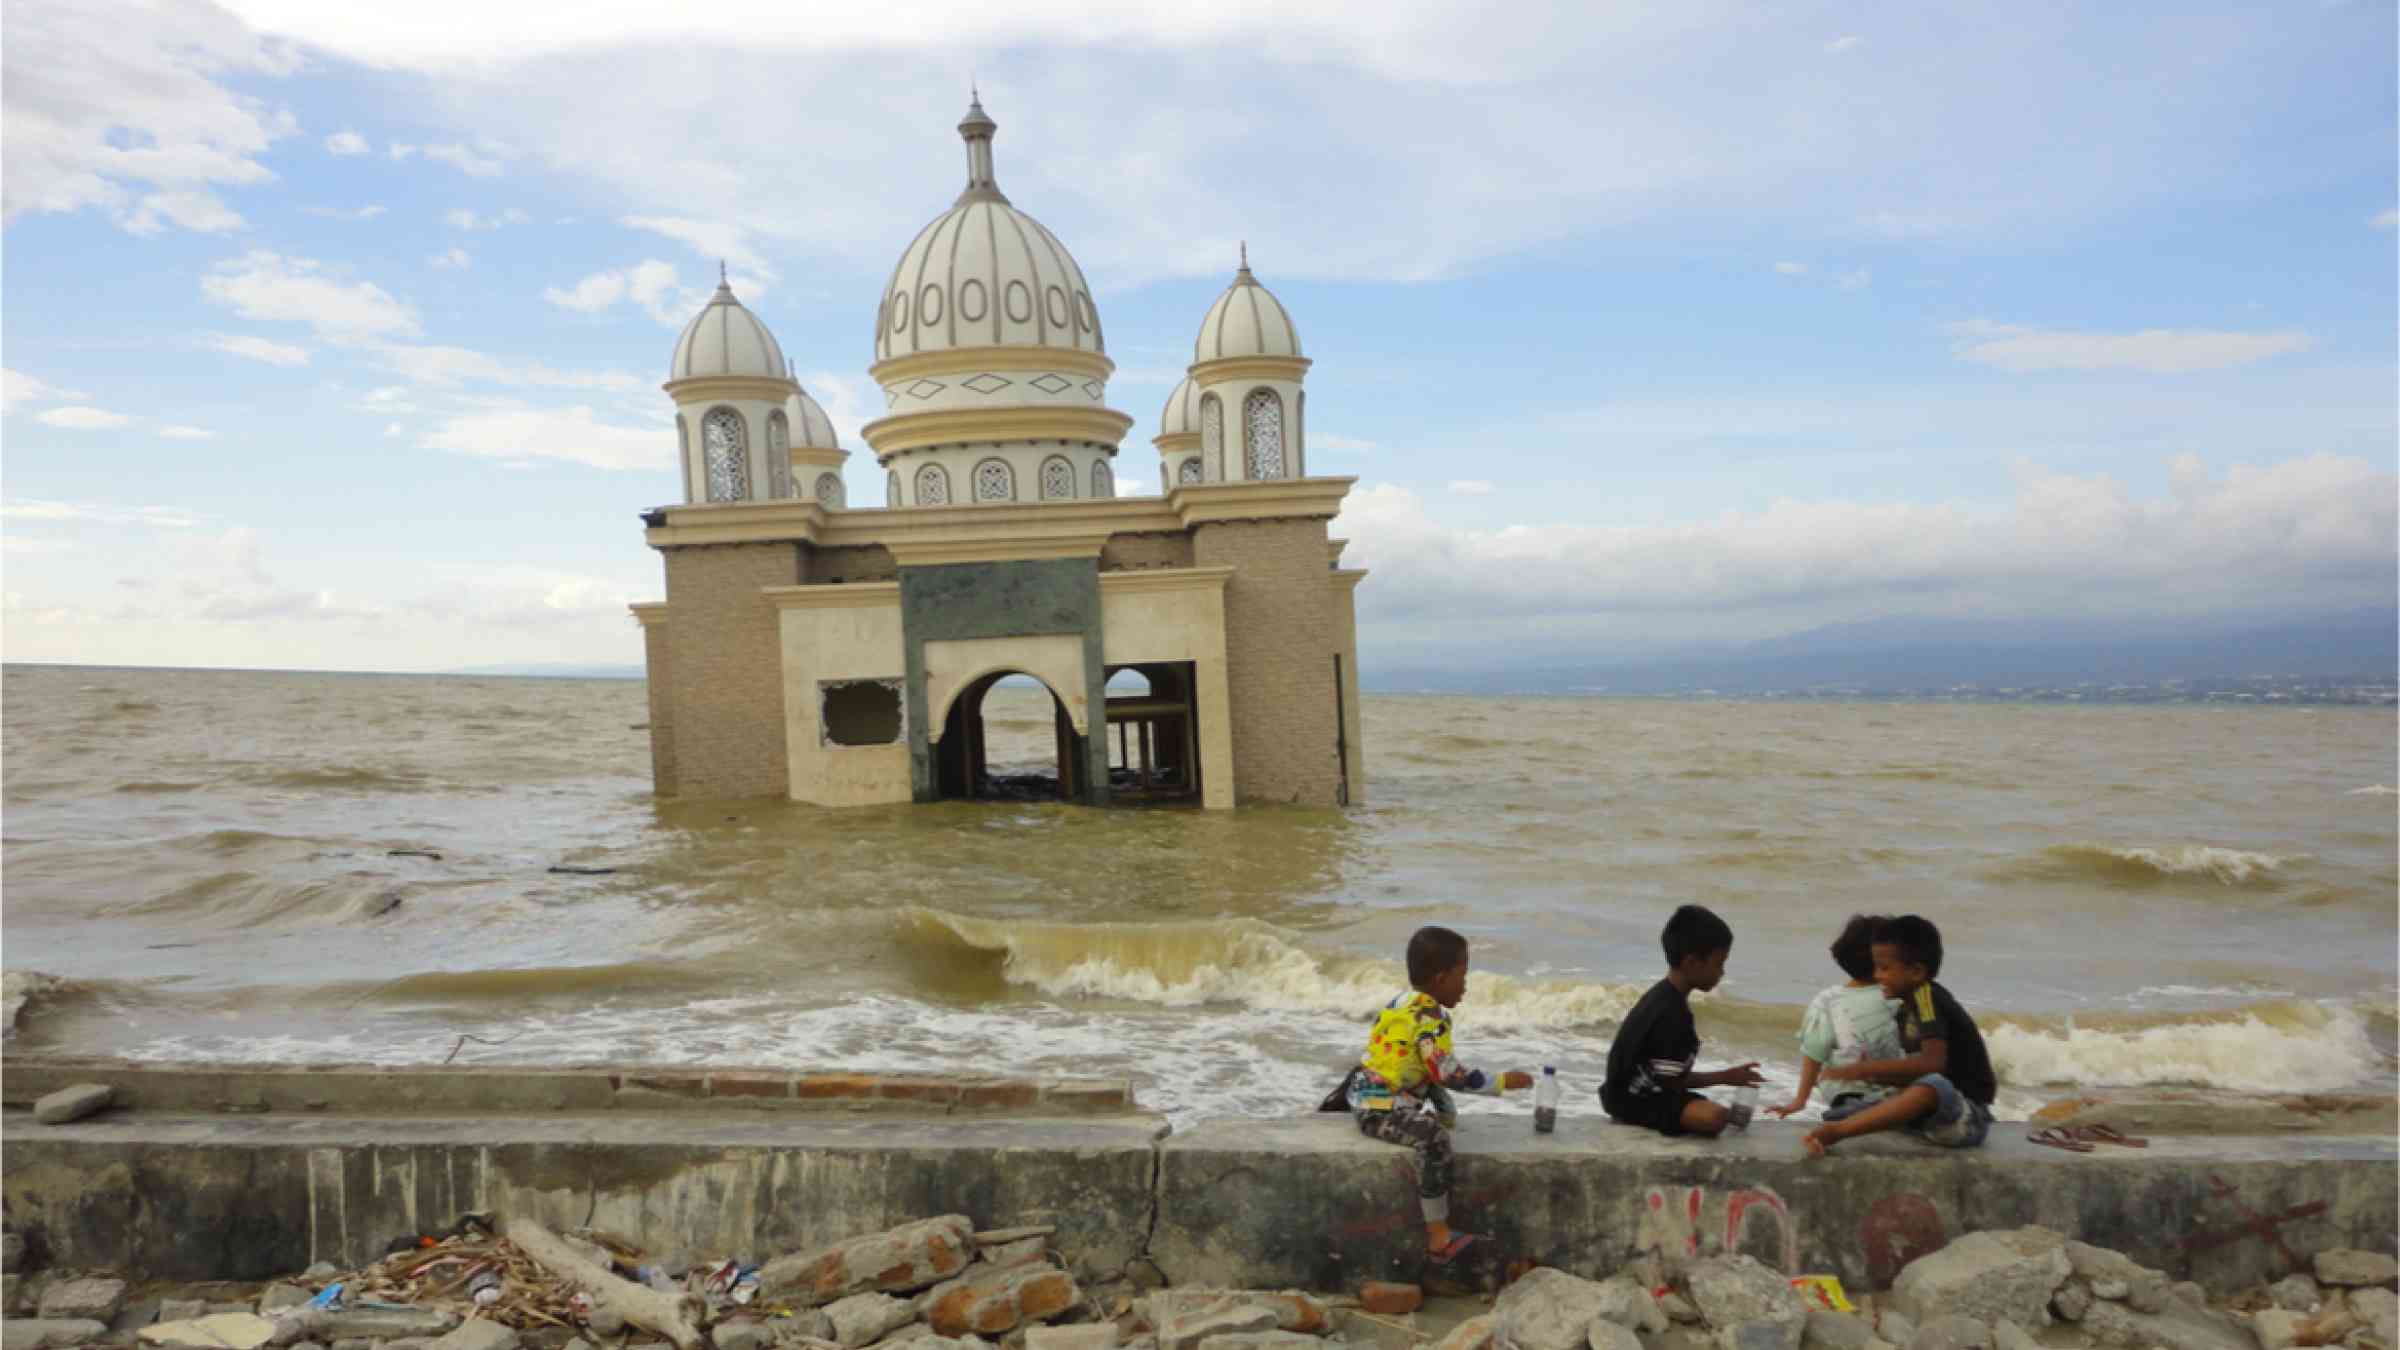 A mosque lies partially submerged in Palu, Indonesia after the 2018 Sulawesi earthquake and tsunami.